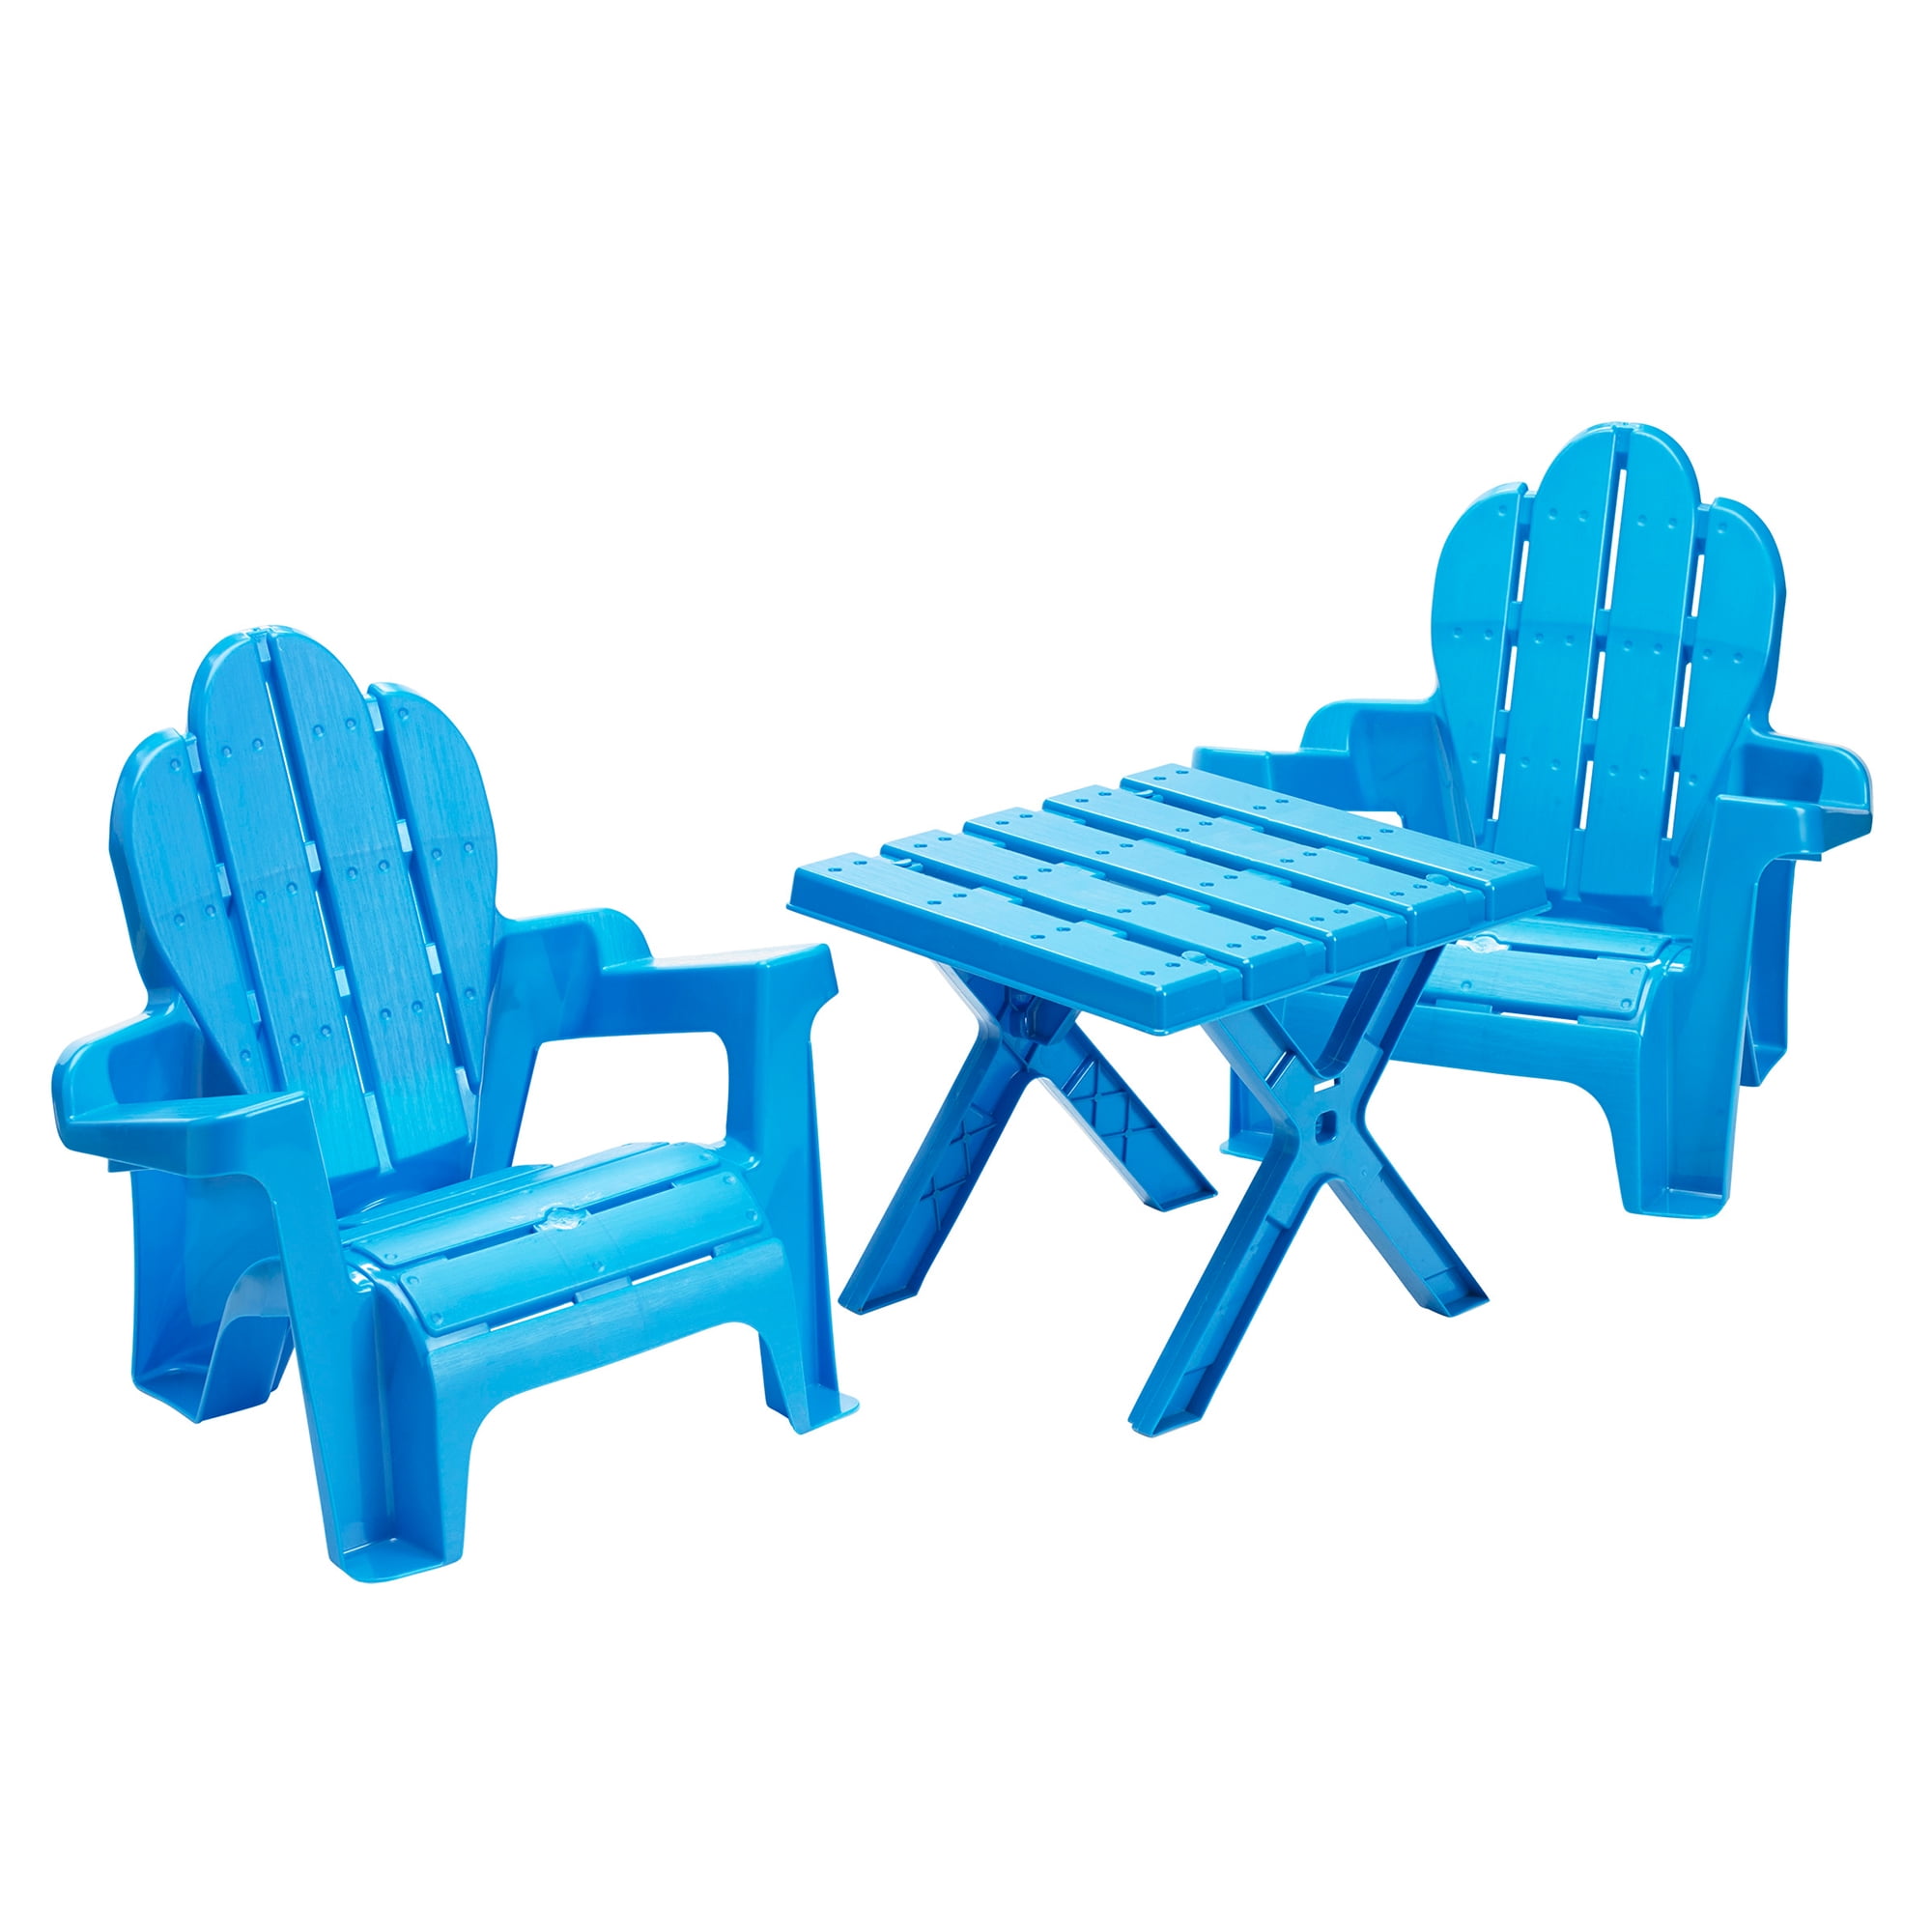 Plastic Chair lightweight portable stack-able summer fashion Indoor Outdoor 